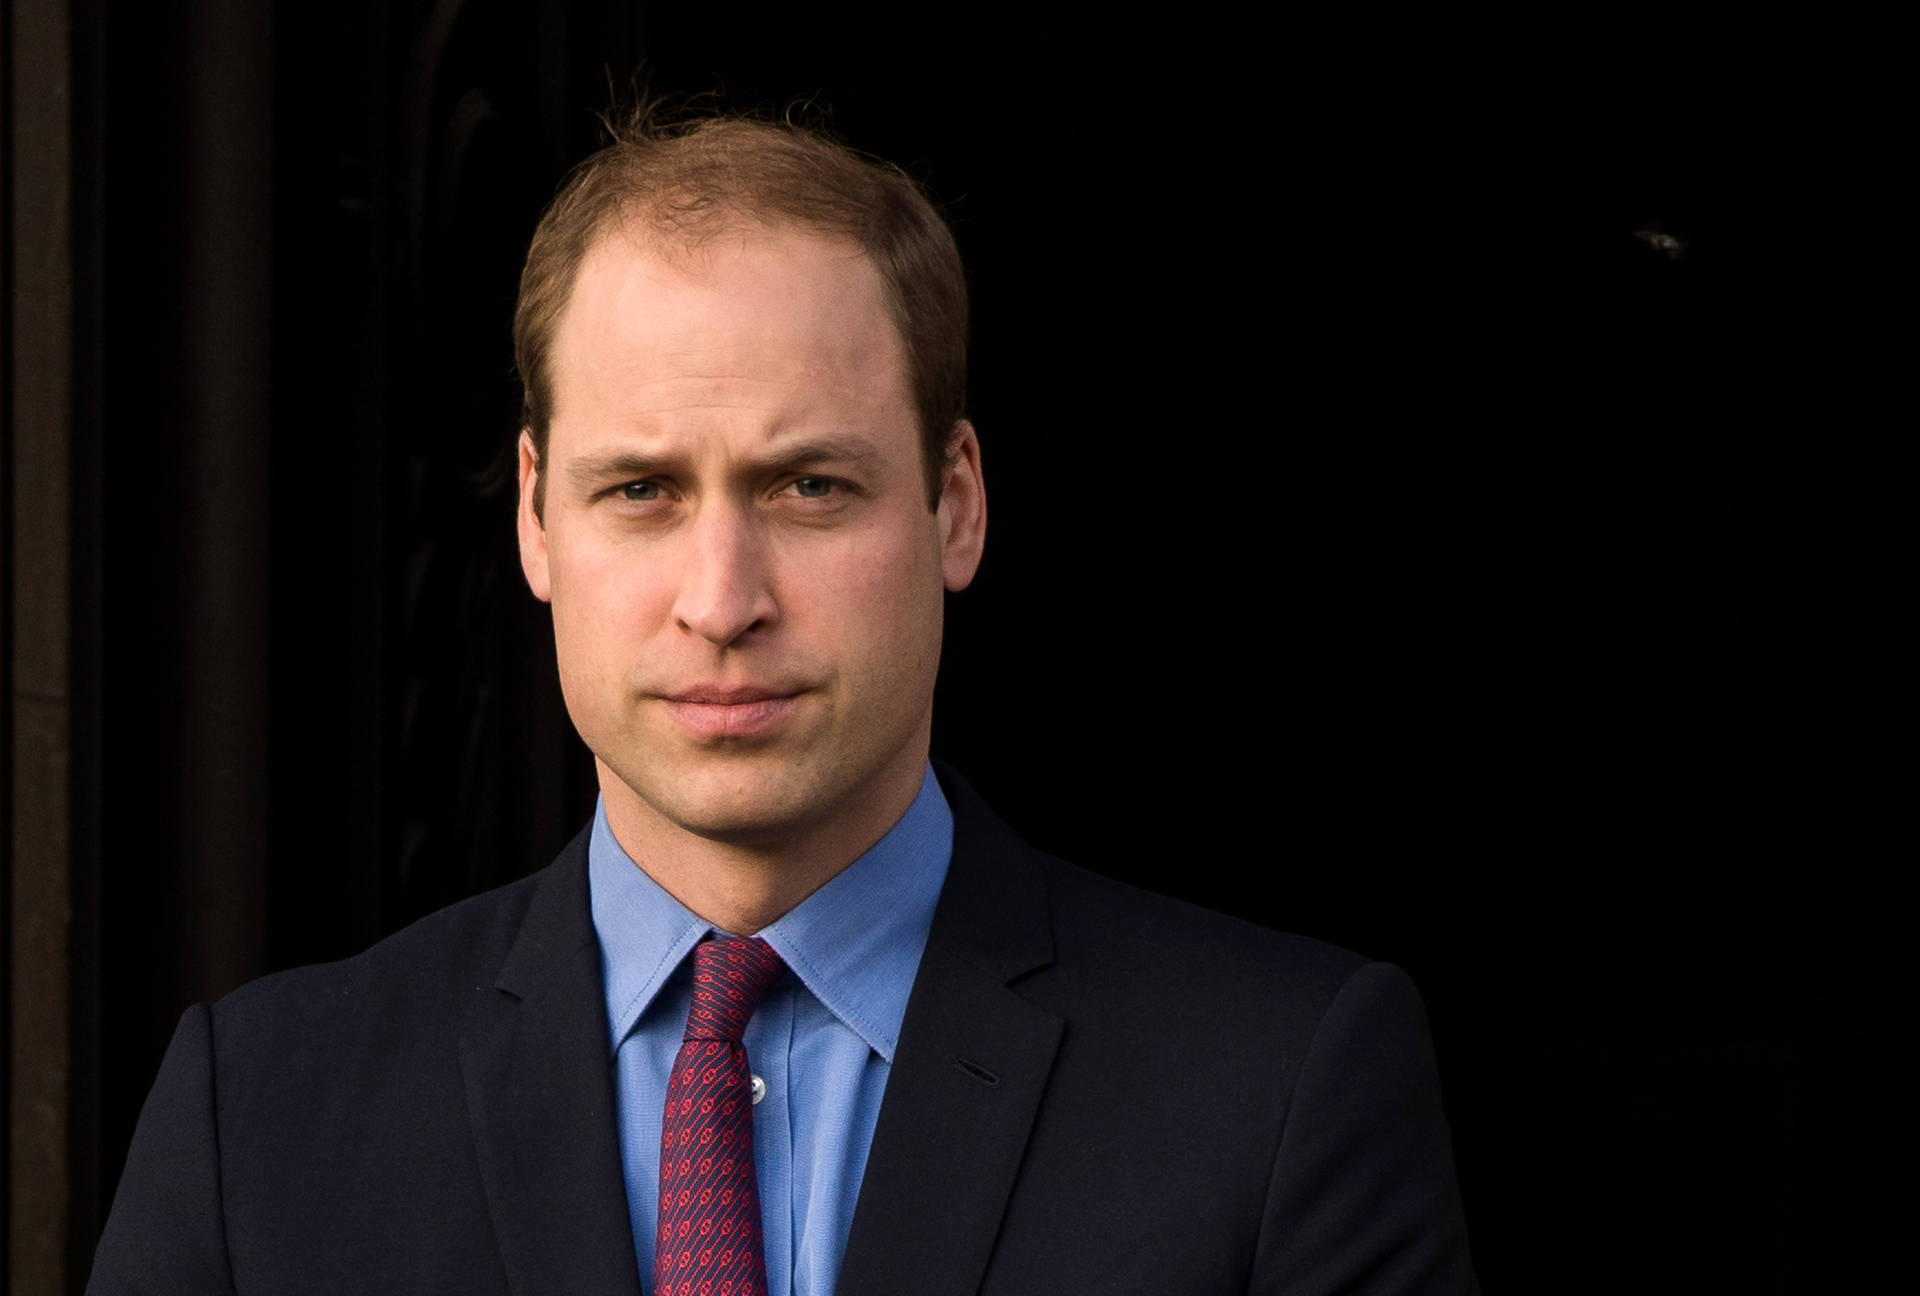 Prince William With Serious Expression